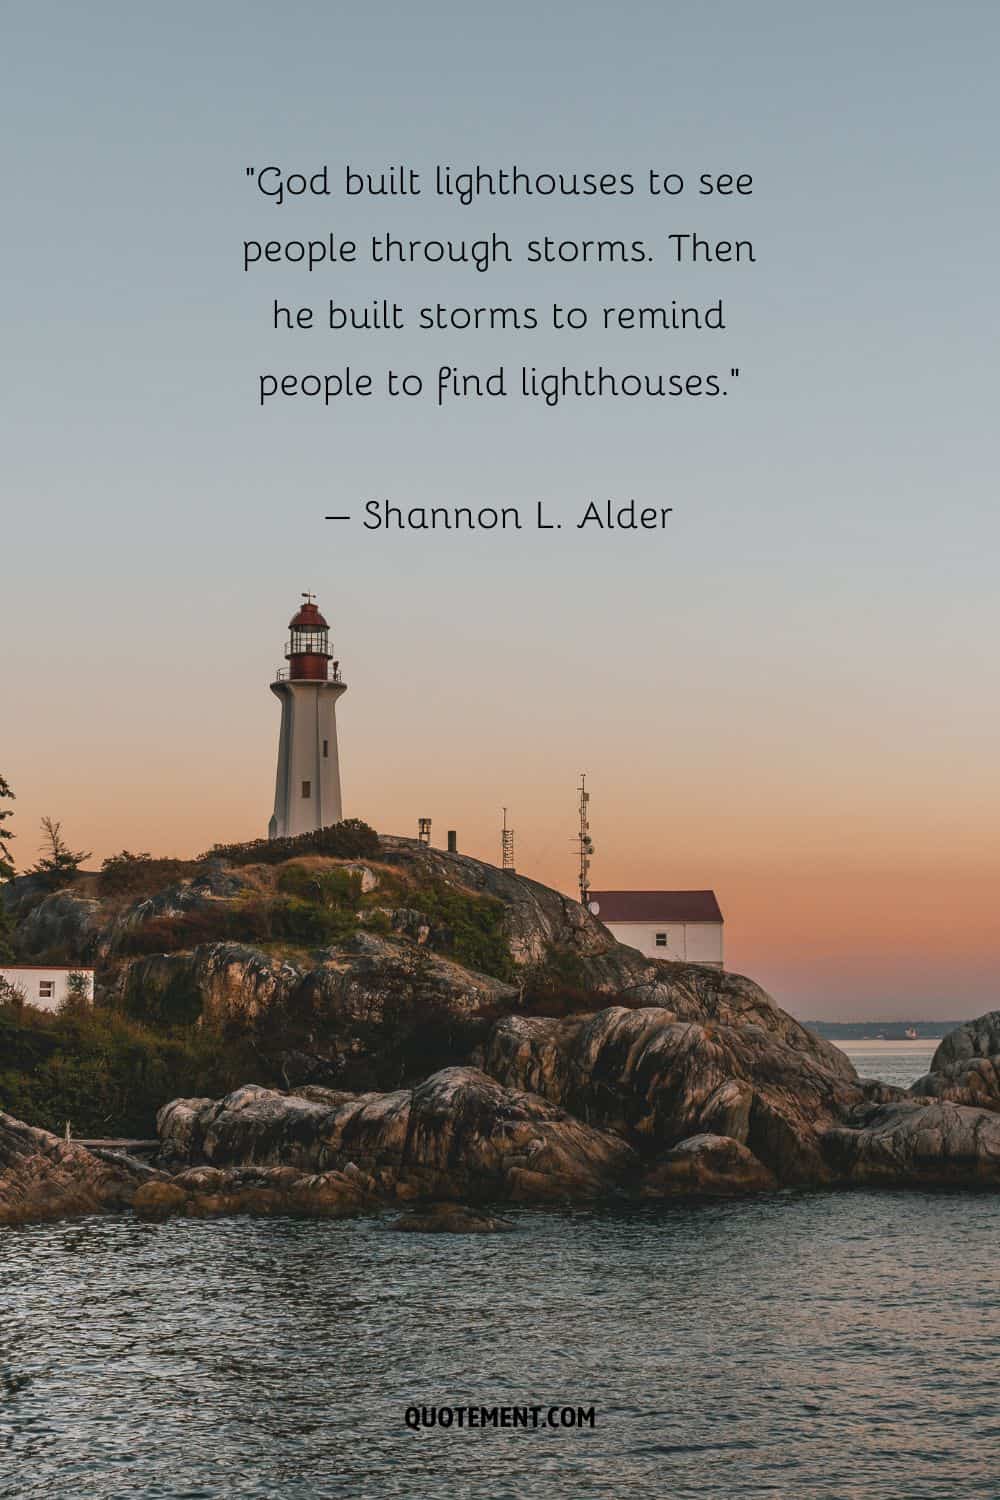 Inspirational quote on the connection between God, lighthouses and people, and a lighthouse in the sunset